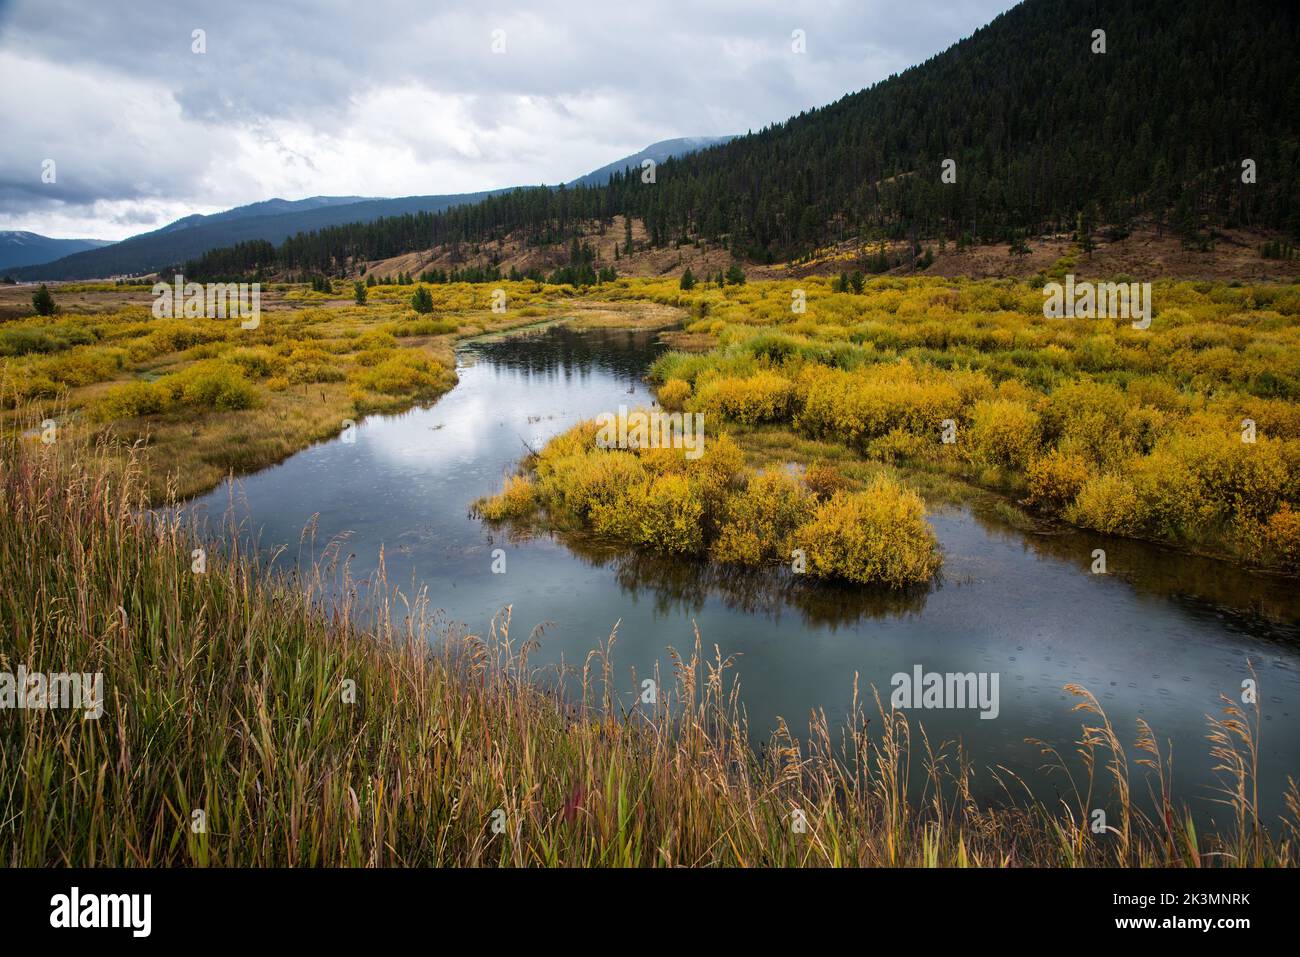 Golden meadows along a meandering stream in West Yellowstone, Montana. The grass turns to warm autumn colors in September and October. Stock Photo